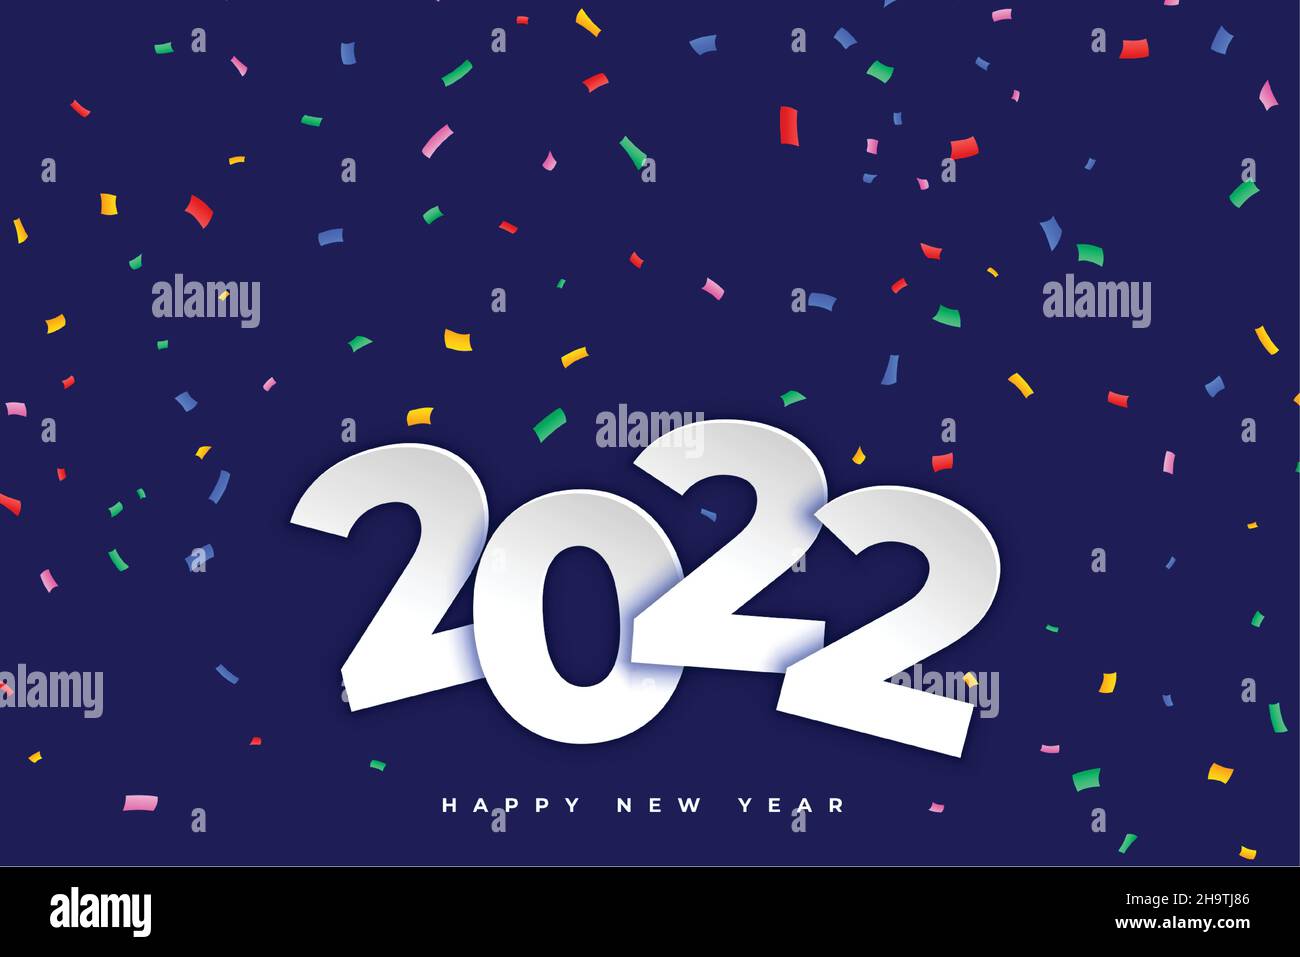 happy new year 2021 banner design on dark purple on happy new year pikachu wallpapers